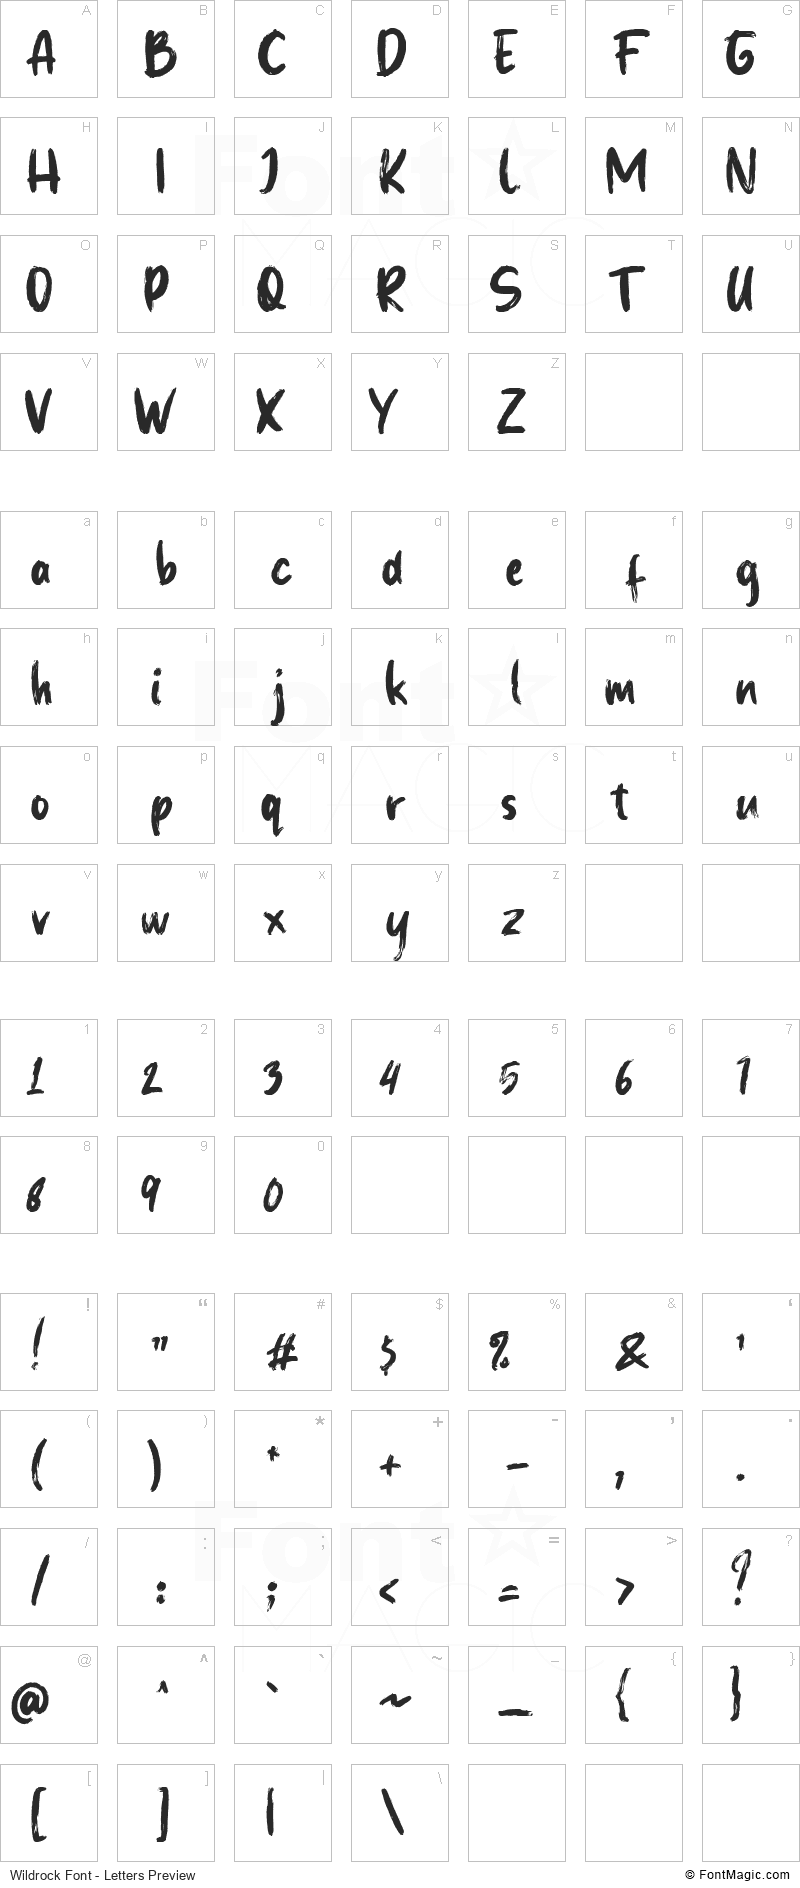 Wildrock Font - All Latters Preview Chart